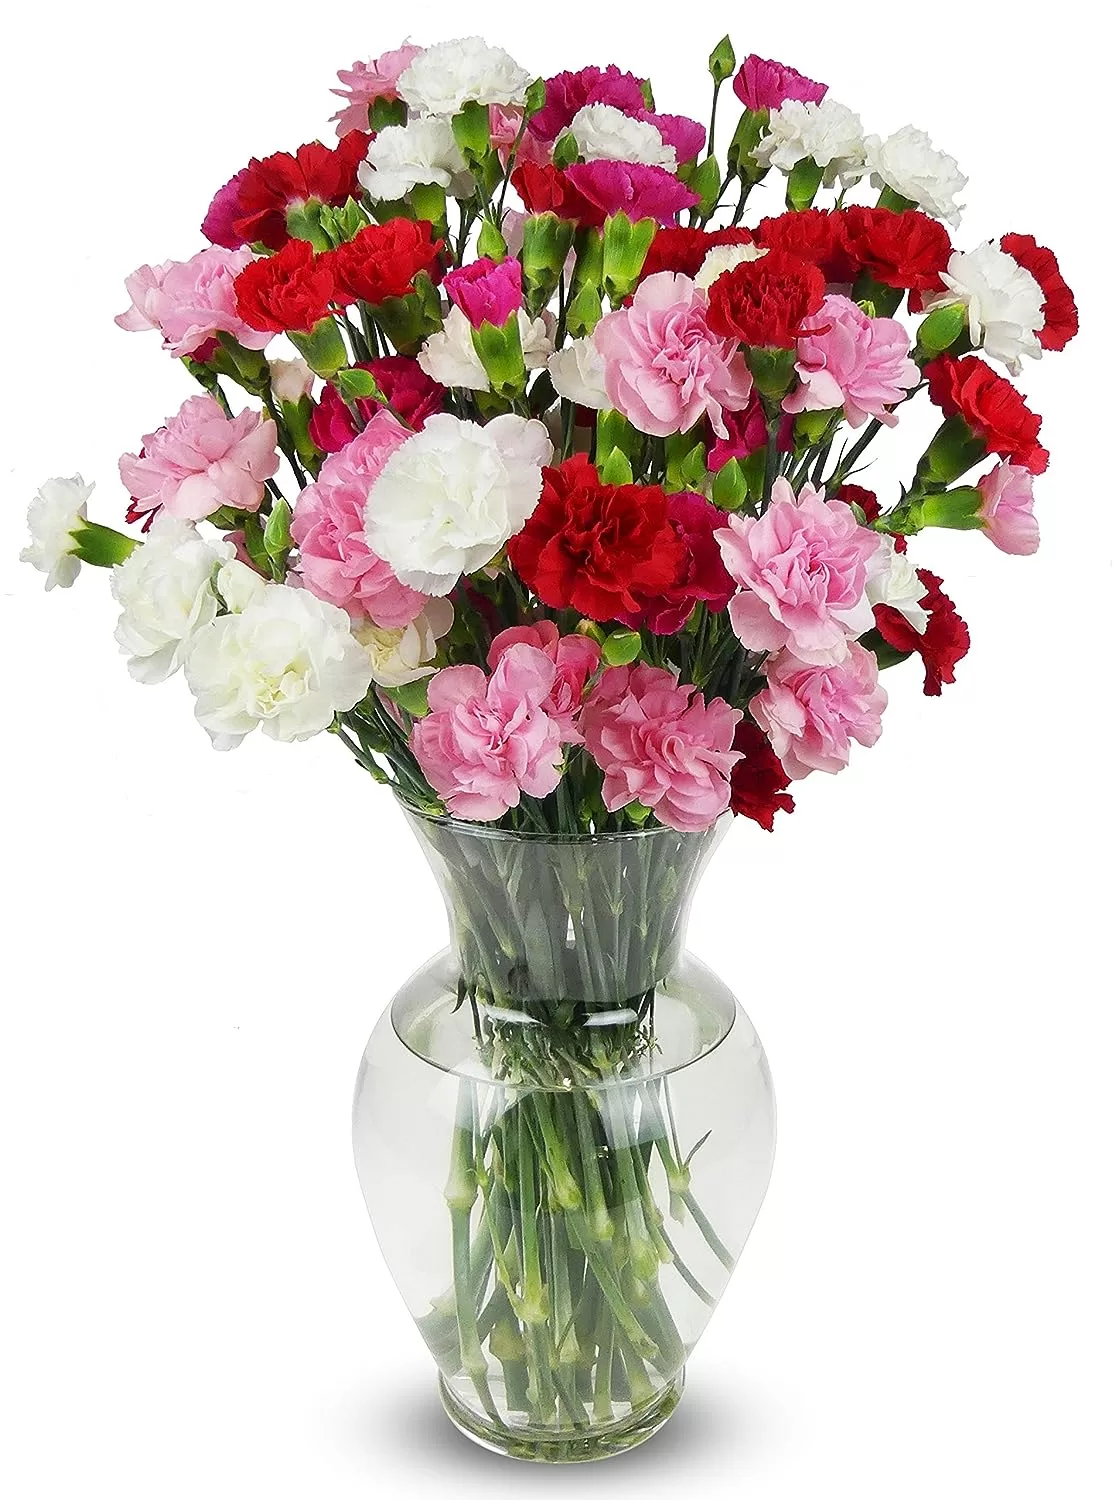 This image shows a bouquet of Flowers from Amazon. They are red, pink and white. 